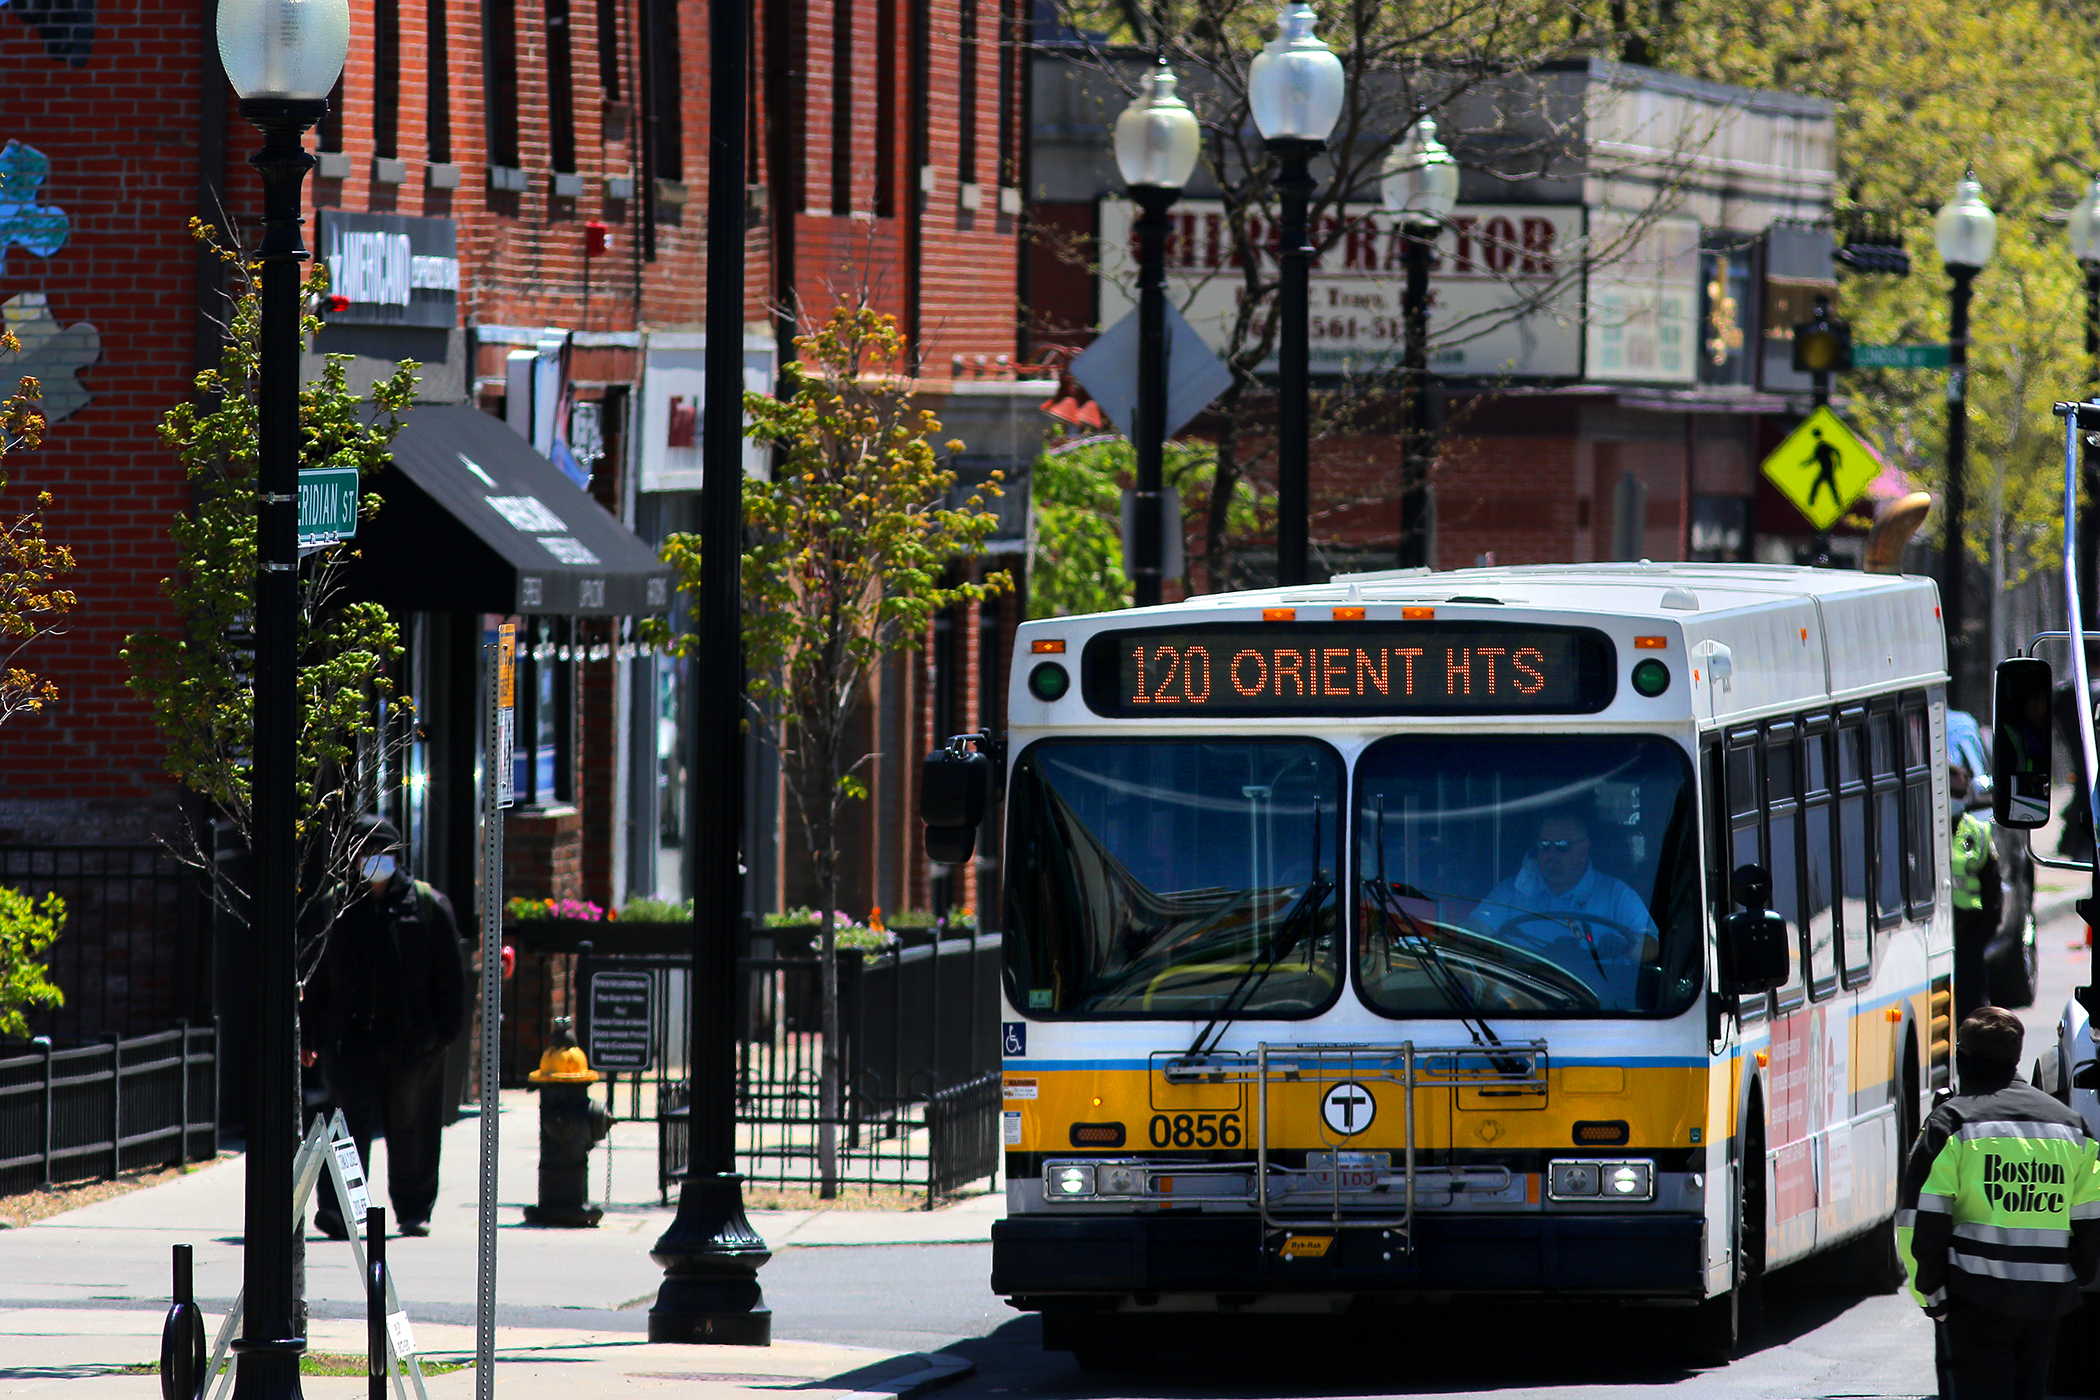 A yellow and blue striped bus with a heading that reads 120 Orient Heights travels along Meridian Street in East Boston, a busy street lined with brick buildings.